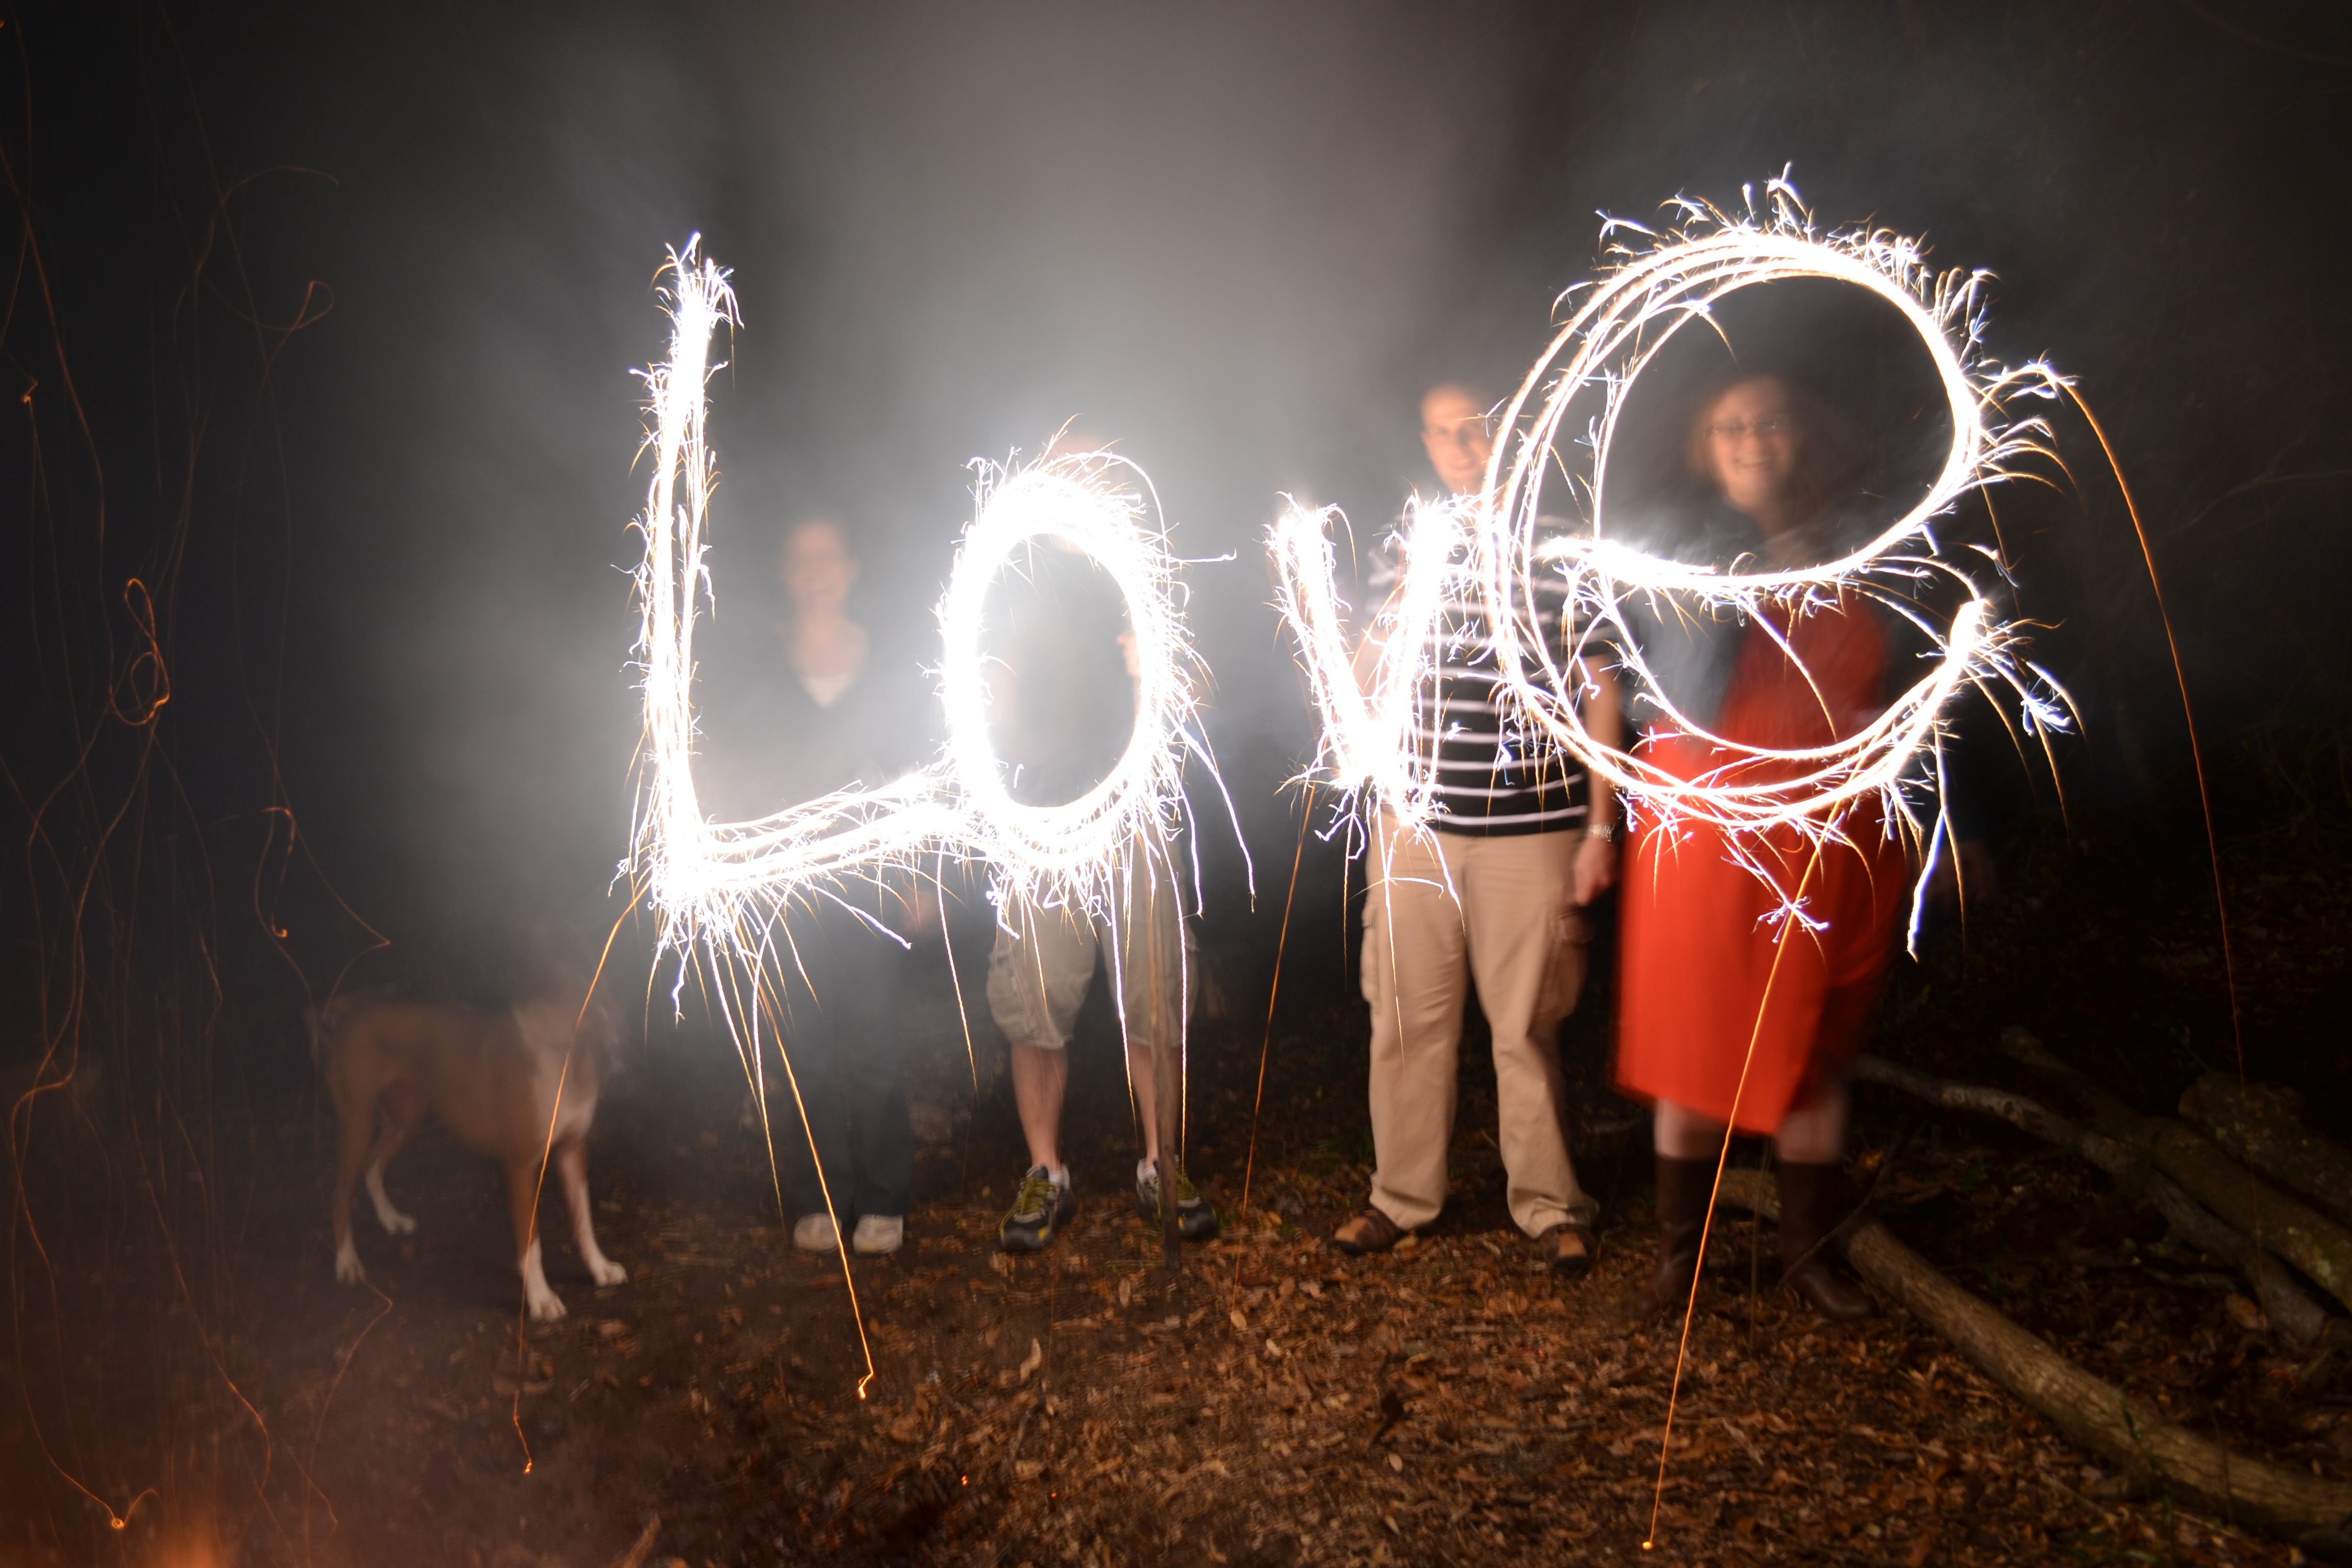 We had so much fun with sparklers on New Years! Pic was taken with ...